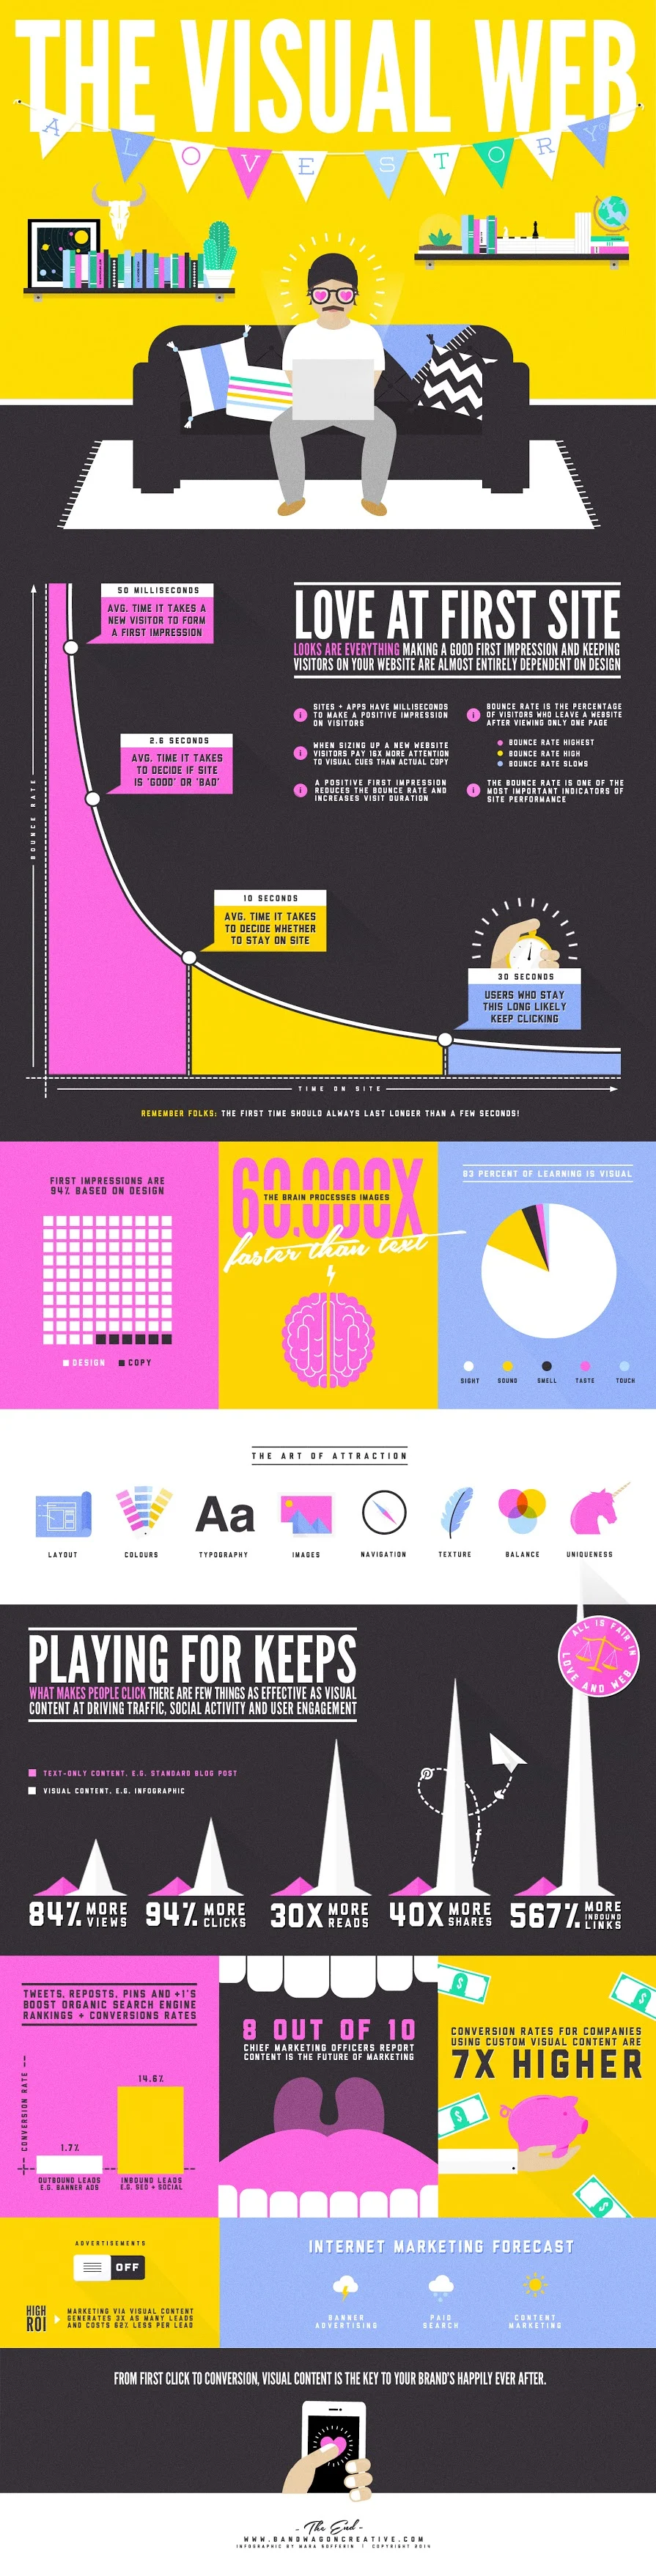 The importance of visual content in marketing (Infographic)